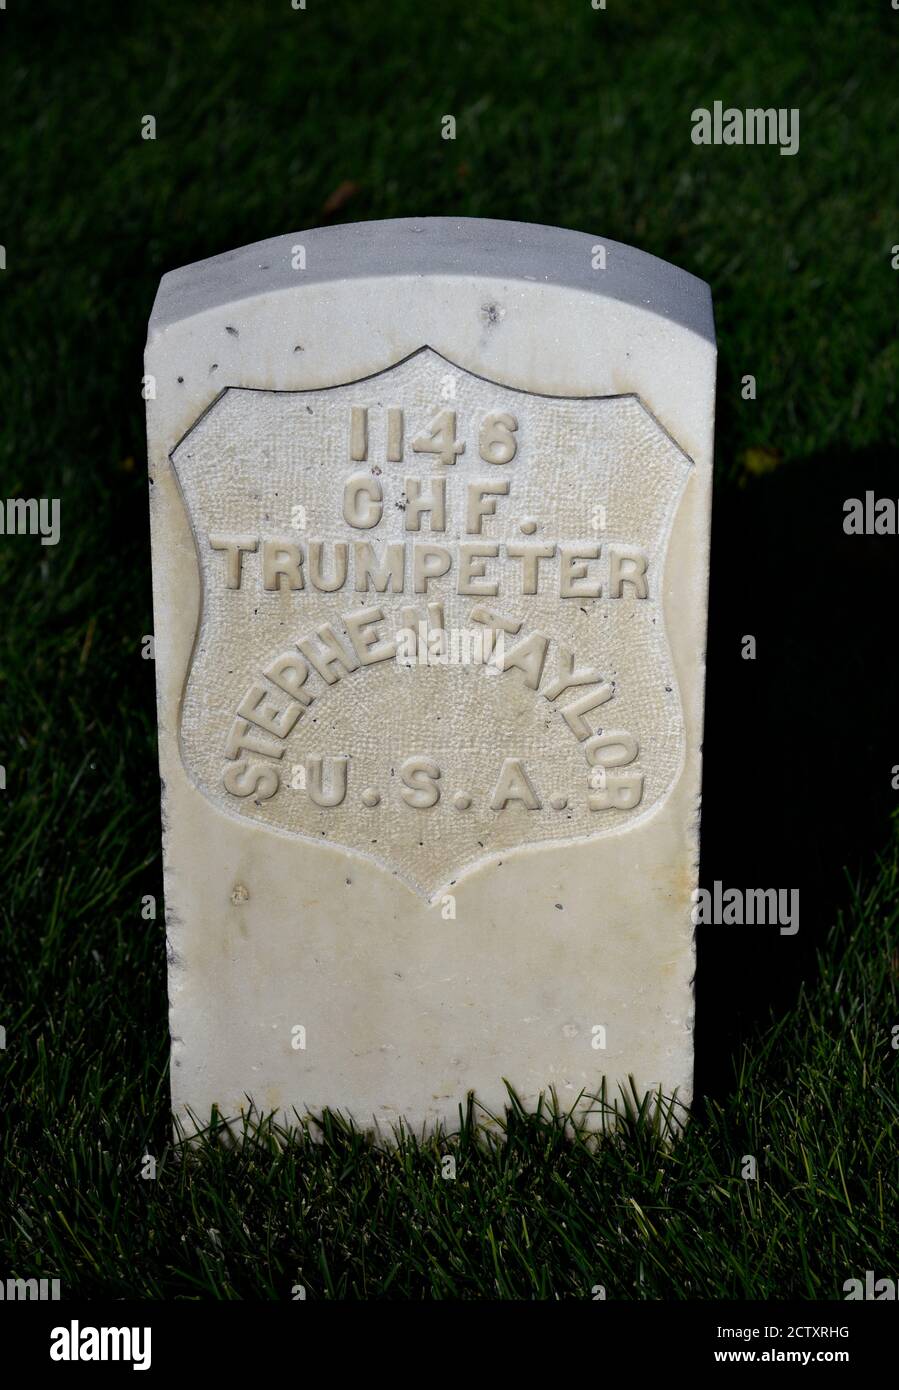 The 19th century marble tombstone of Buffalo Soldier Stephen Taylor, the African-American Chief Trumpeter of the U.S. Army's Ninth Cavalry Regiment. Stock Photo